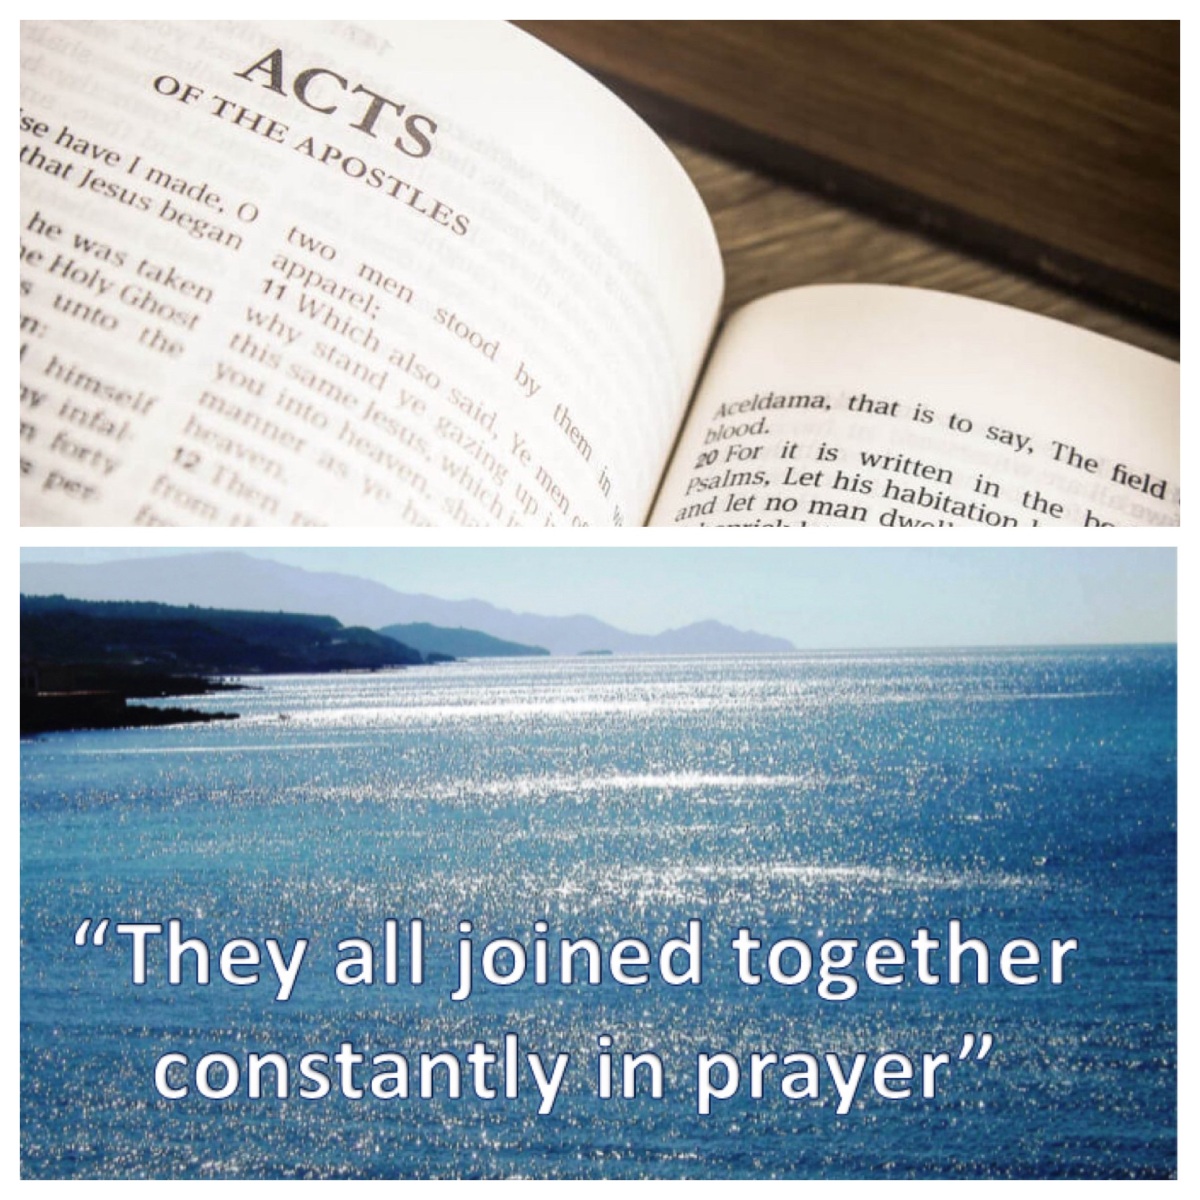 Constantly devoting themselves to prayer (Acts 1; Narrative Lectionary for Easter 2)